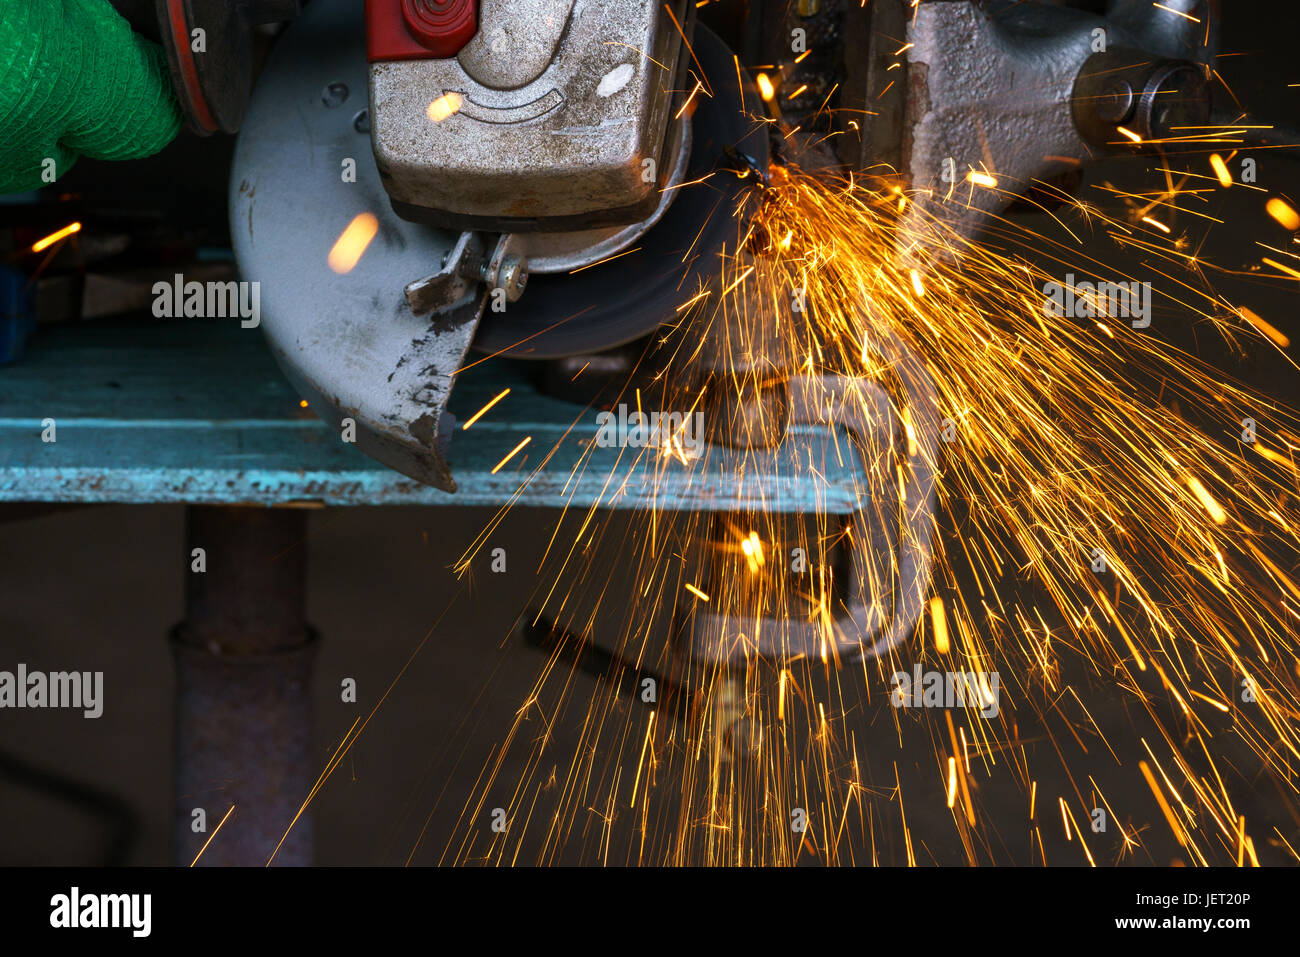 Angular grinding machine is cutting the metal and a lot of sparks flying around Stock Photo